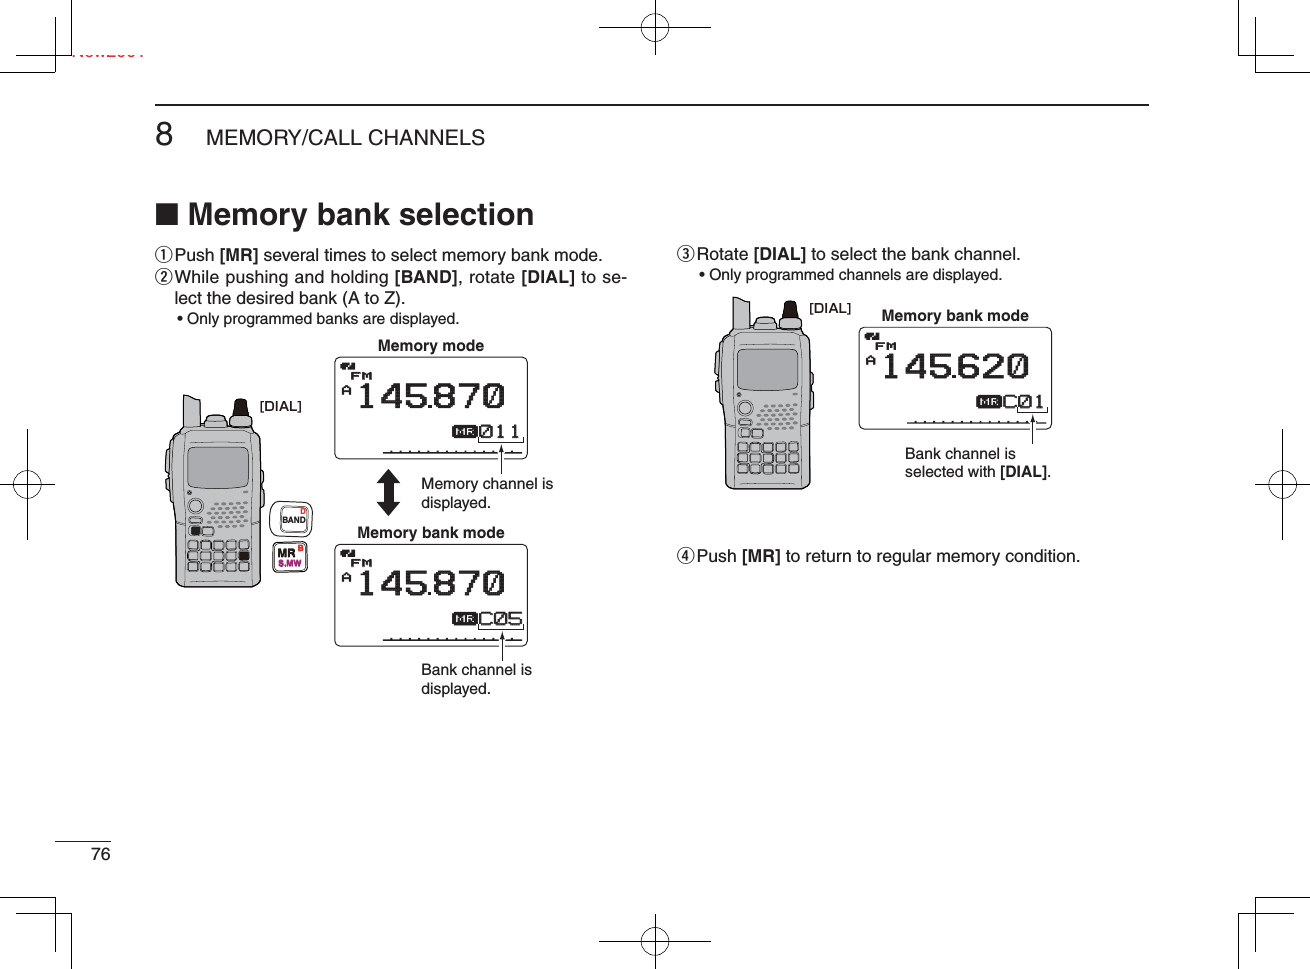 Ne768MEMORY/CALL CHANNELSNew2001■ Memory bank selectionq  Push [MR] several times to select memory bank mode.w  While pushing and holding [BAND], rotate [DIAL] to se-lect the desired bank (A to Z).• Only programmed banks are displayed.e  Rotate [DIAL] to select the bank channel.• Only programmed channels are displayed.r  Push [MR] to return to regular memory condition.AμFMFM145870011011Memory modeAμFMFM145870C05C05Memory bank modeBank channel is displayed.Memory channel is displayed.[DIAL]MRS.MWBBANDDAμFM145620C01C01Memory bank modeBank channel is selected with [DIAL].[DIAL]